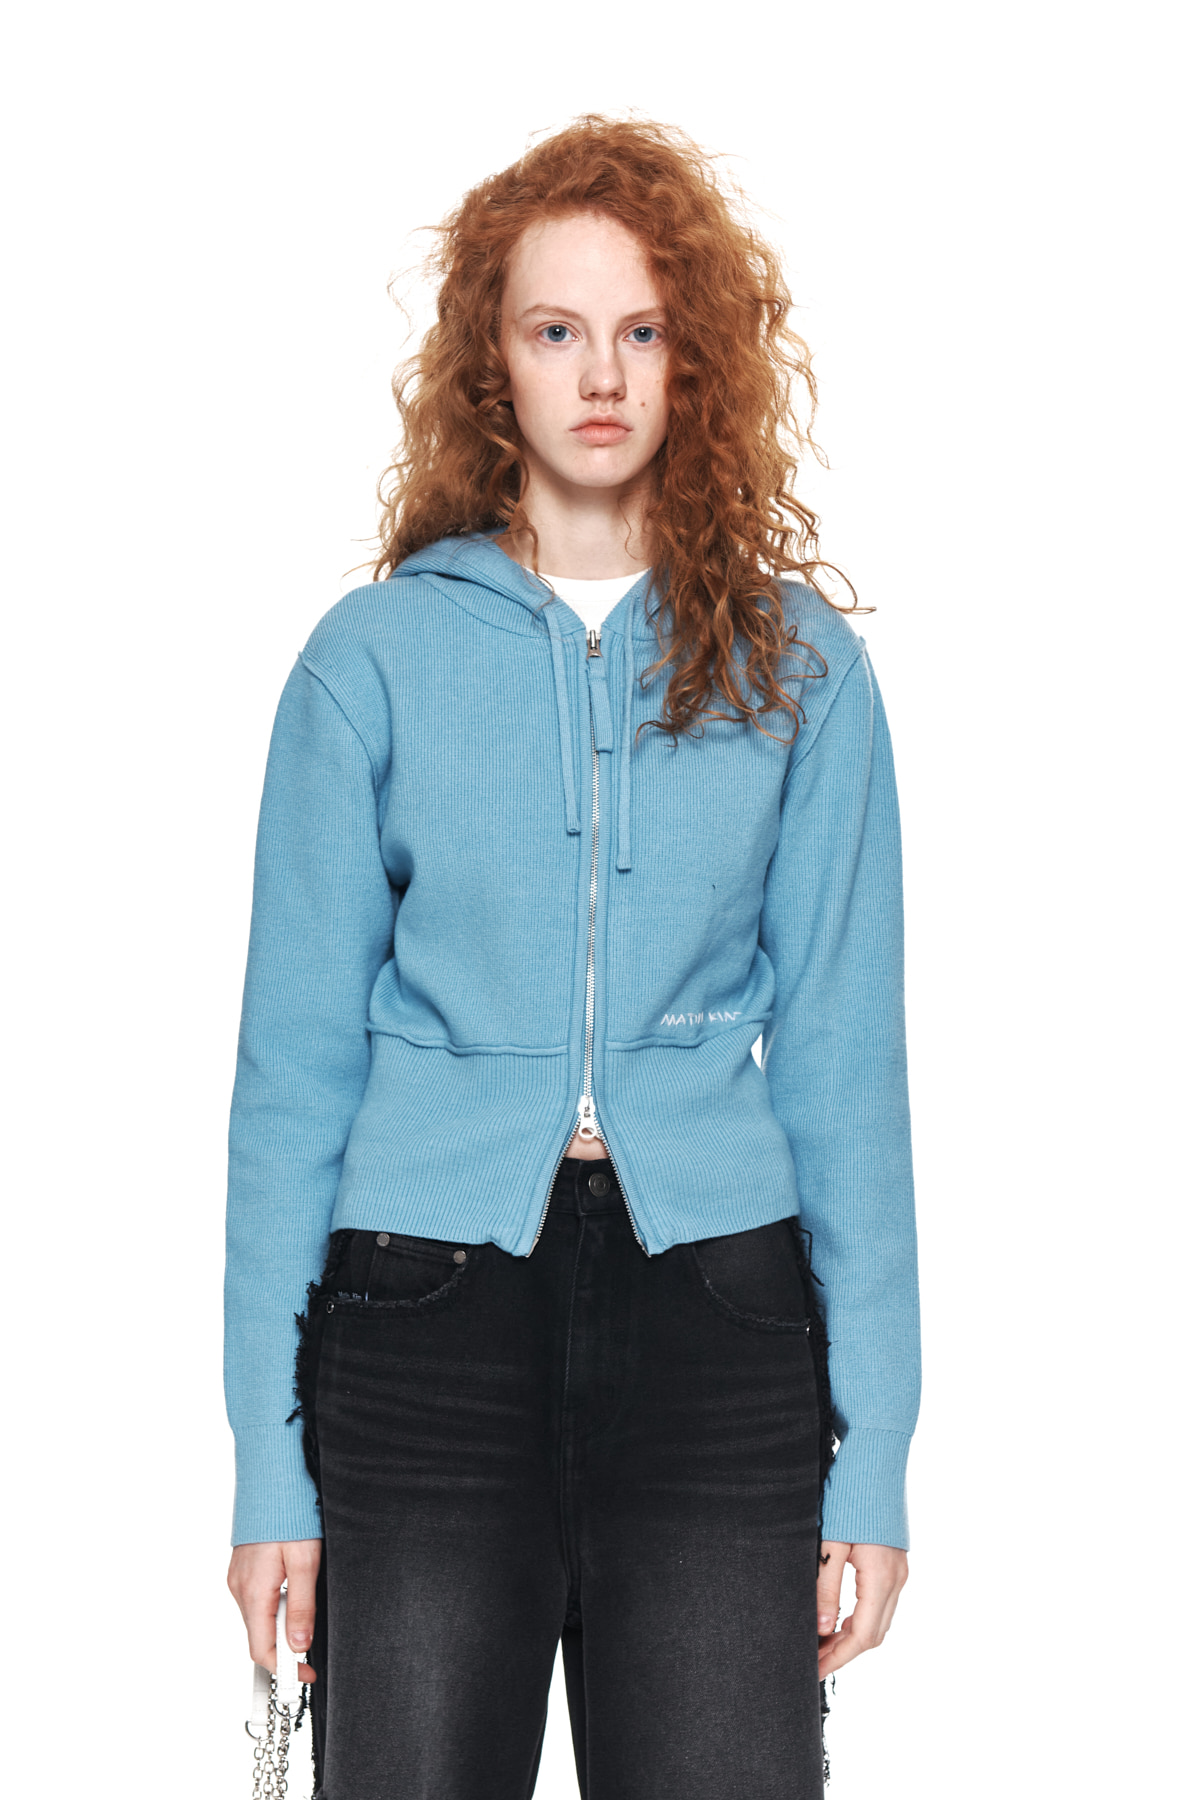 RIBBED KNIT HOODY ZIP UP FOR WOMEN IN SKY